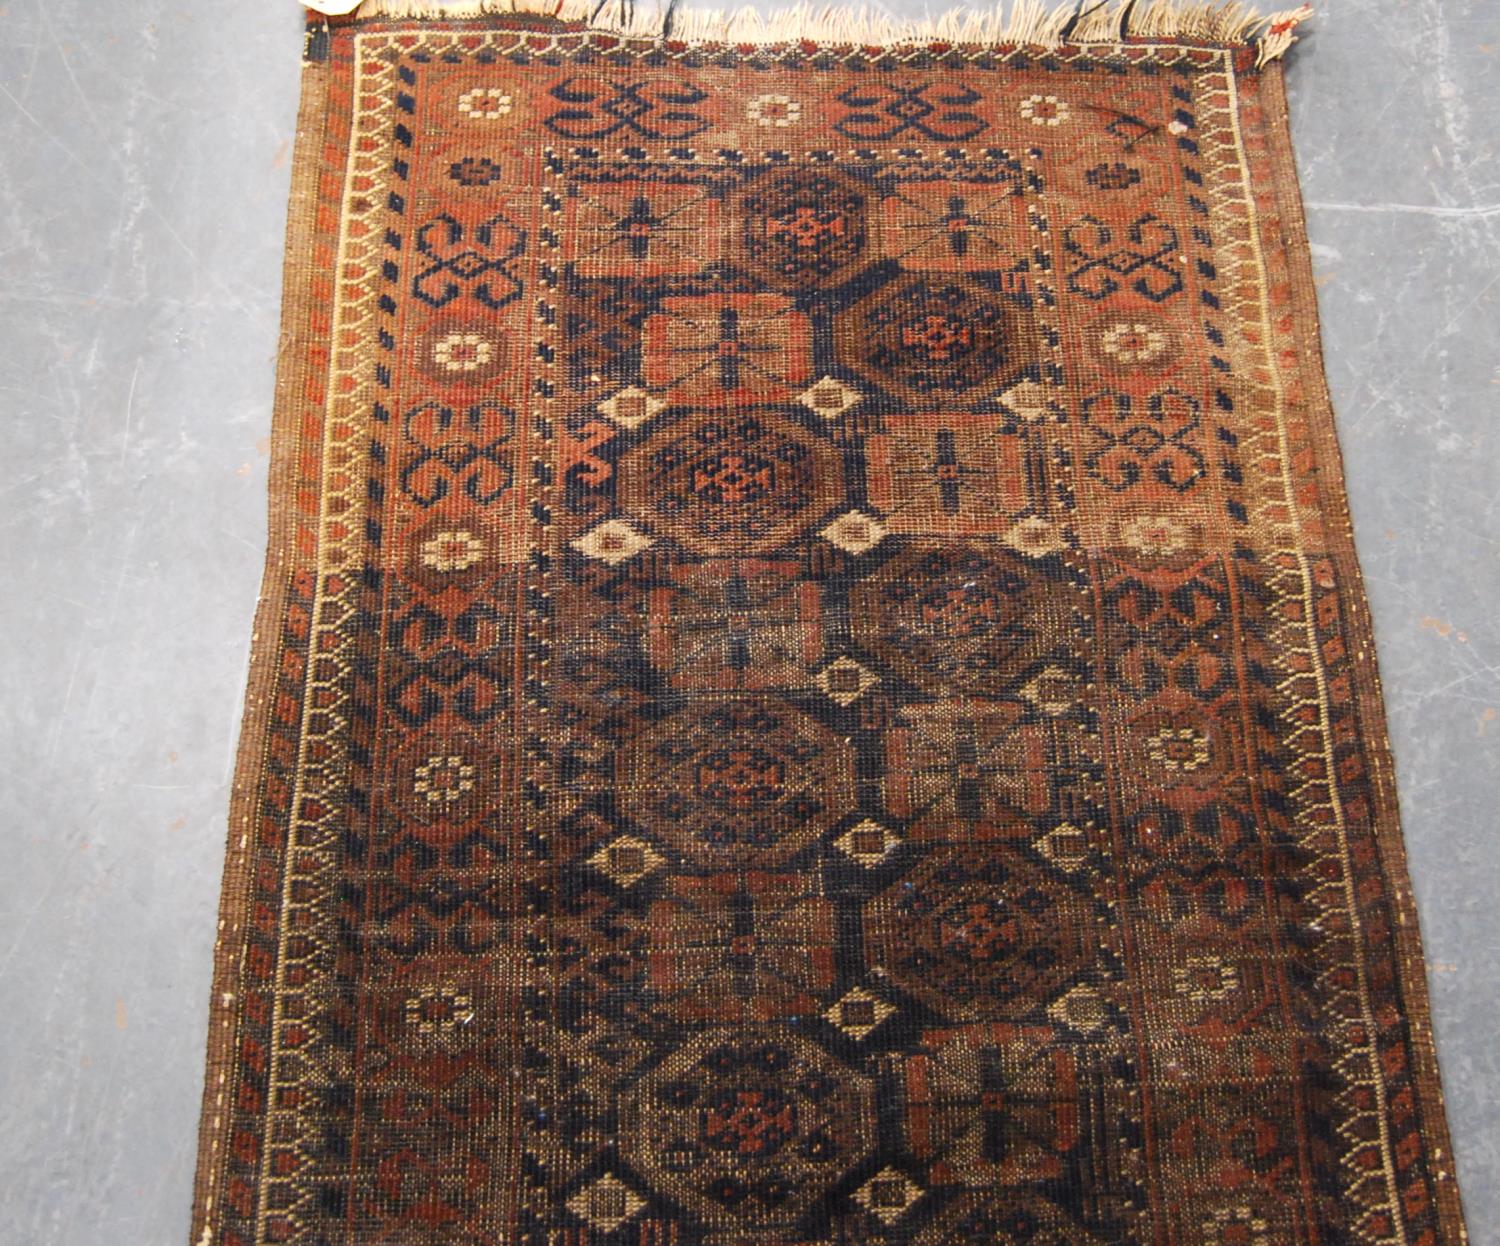 Eastern rug with two rows of eleven rosettes over faded brown ground, and triple border, 142cm x - Image 3 of 4